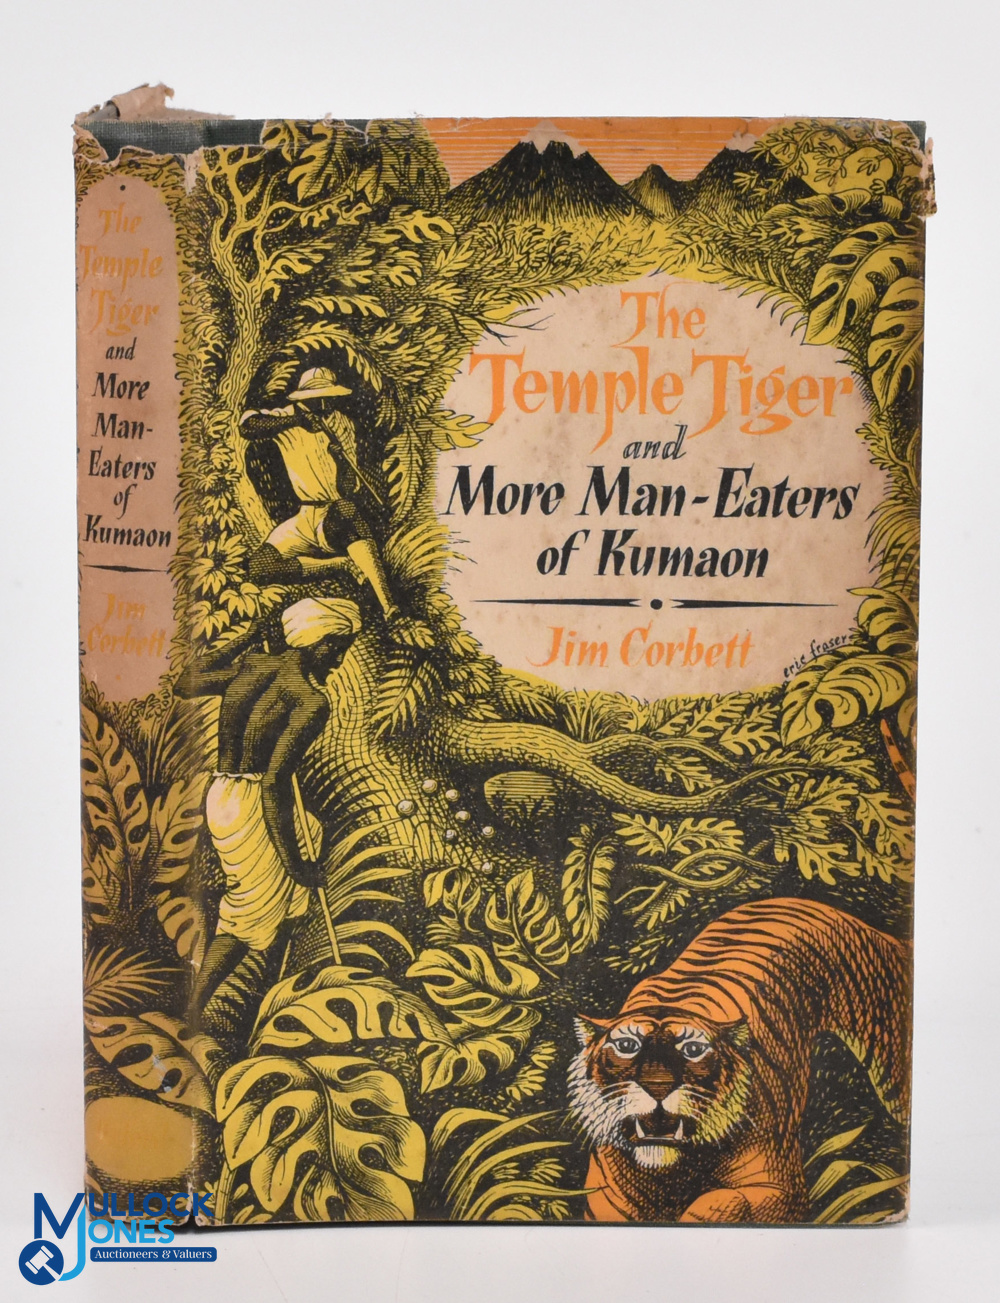 India - The Temple Tiger and More Man-Easters of Kumaon, by Jim Corbett, second impression 1954,